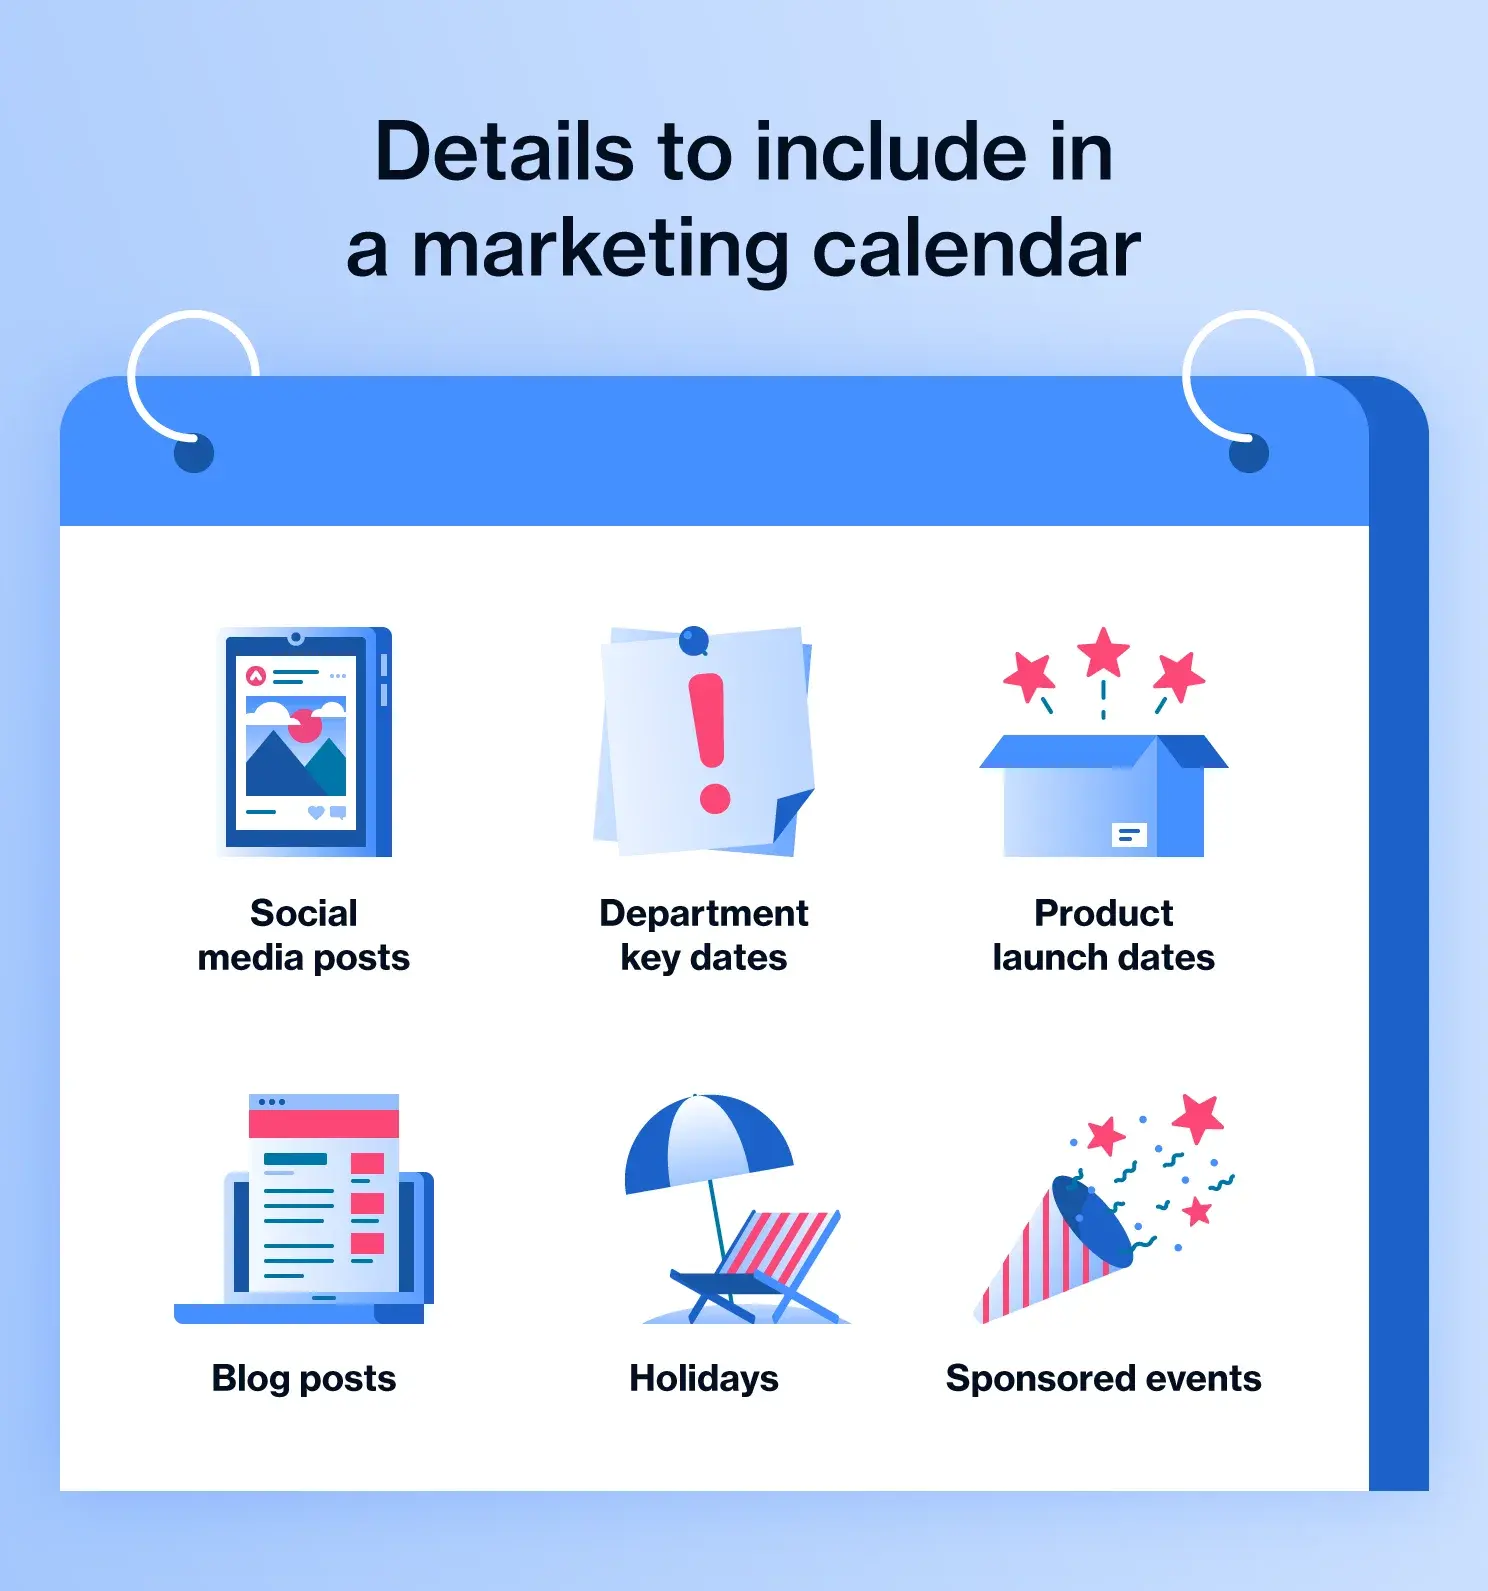 details to include in a marketing calendar